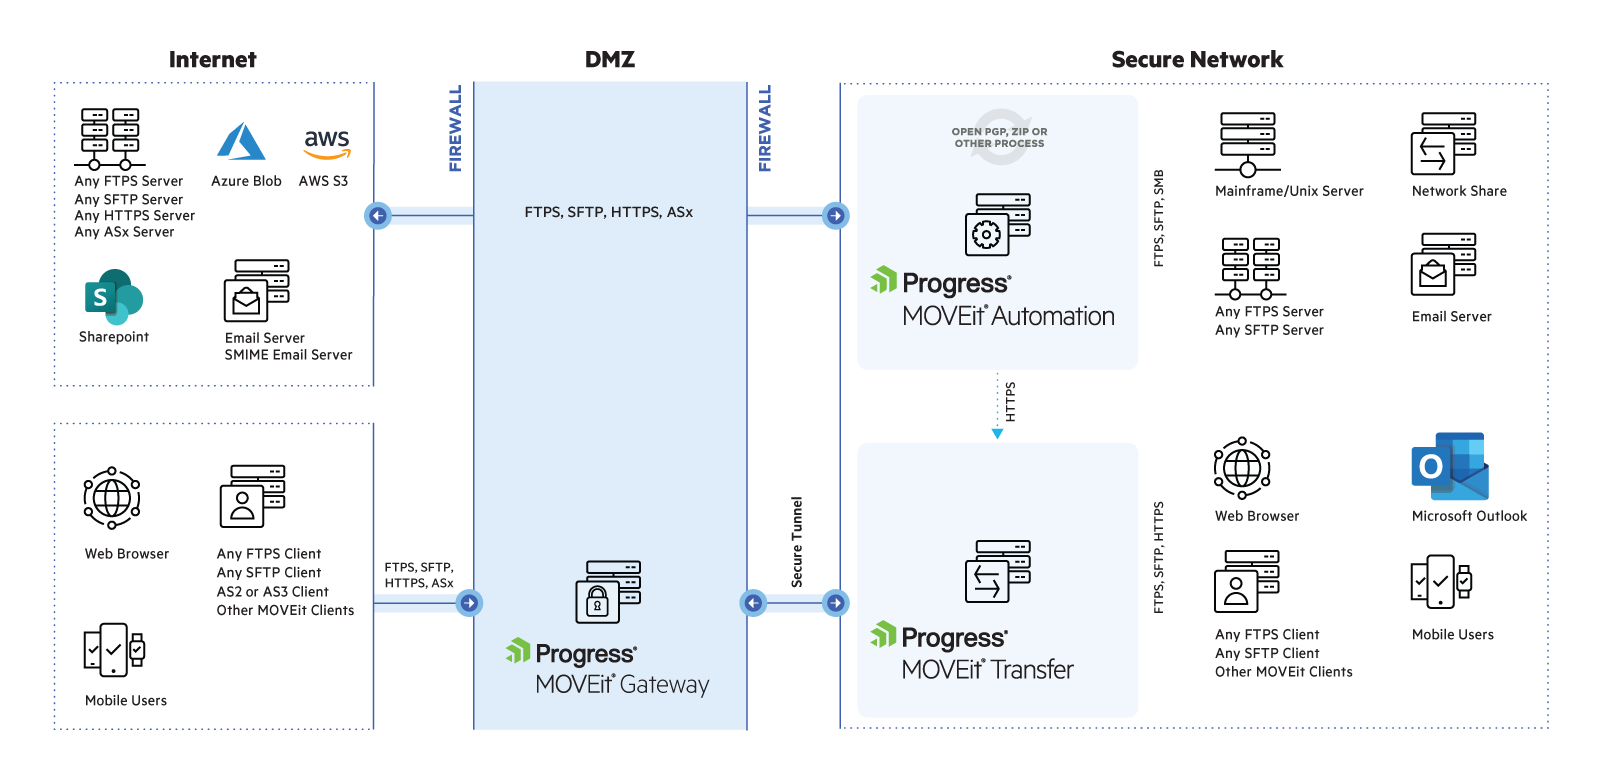 MOVEit architecture diagram with MOVEit Gateway in the DMZ. Traffic from Internet reaches secure internal network through MOVEit Gateway via secure tunnel.